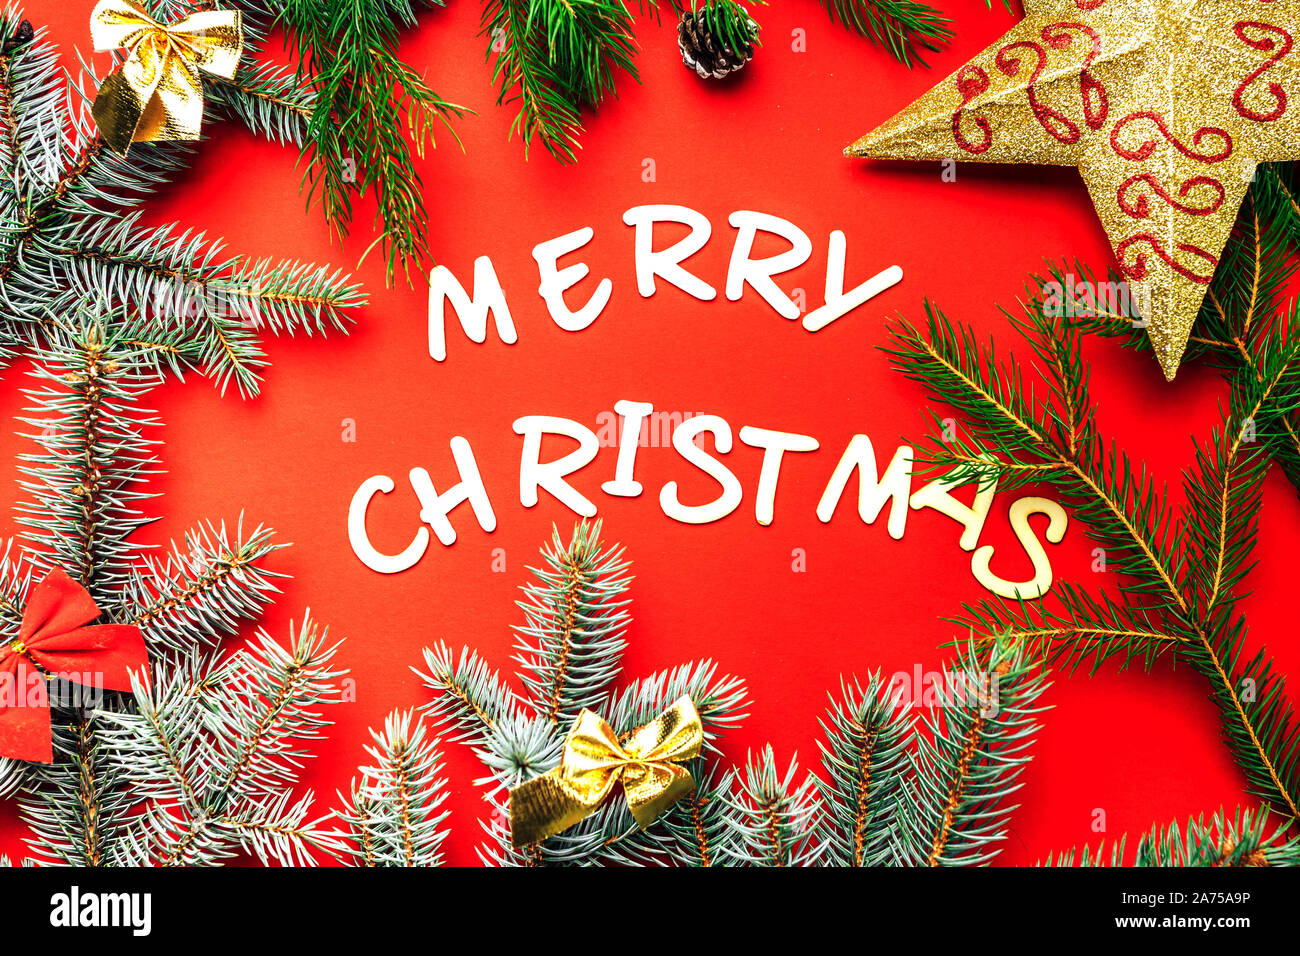 Wooden letters of Merry Christmas words on red background flat lay